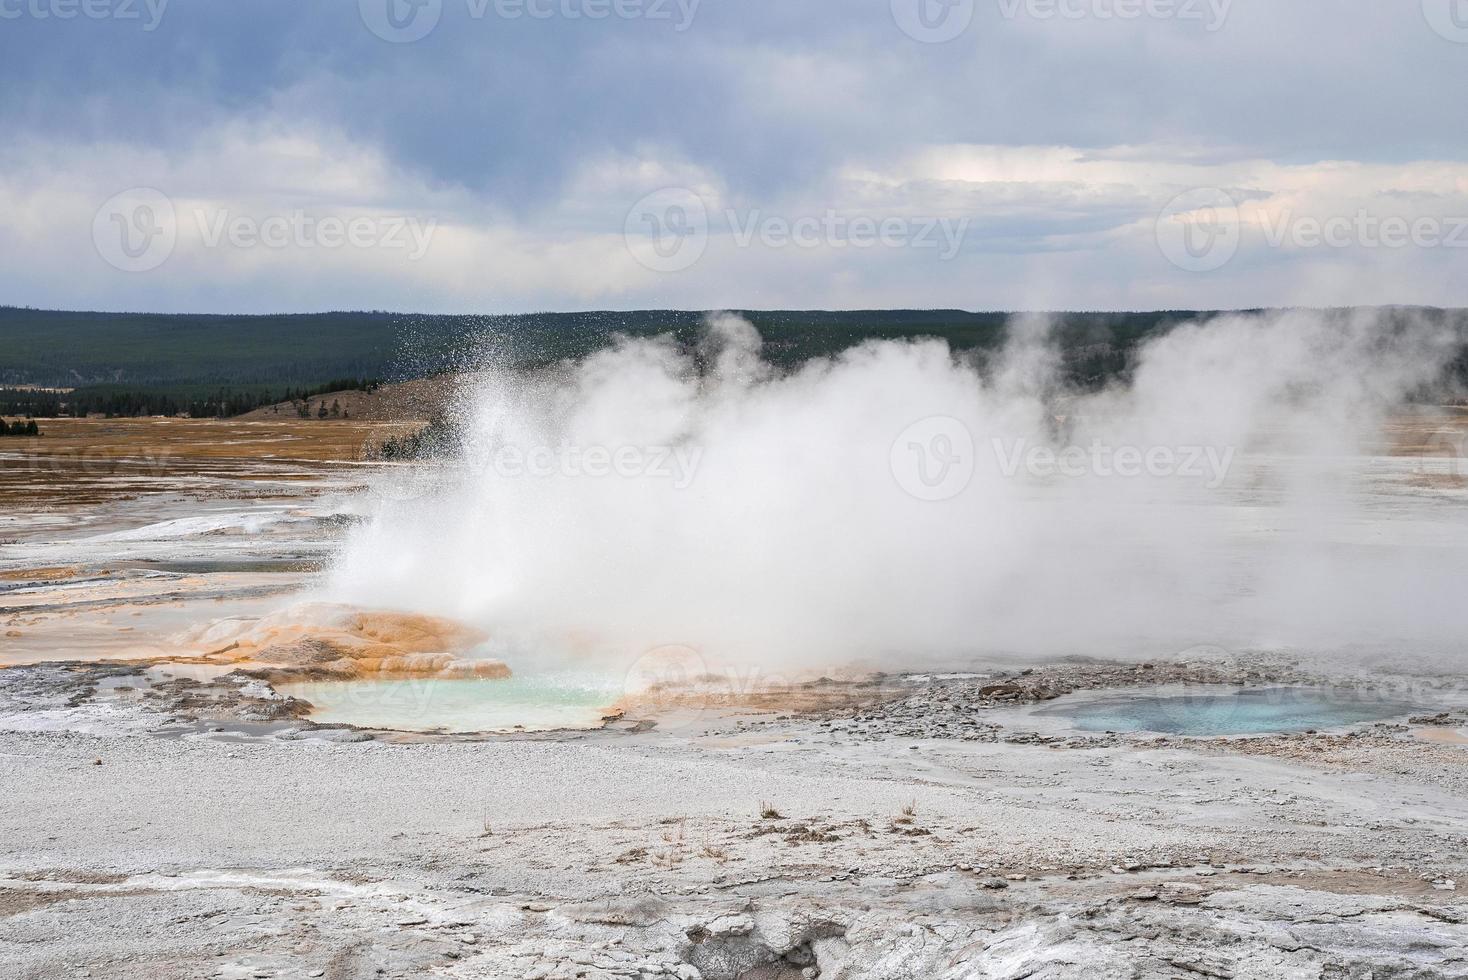 Fumo emitting a partire dal clessidra scaldabagno a Yellowstone nazionale parco foto